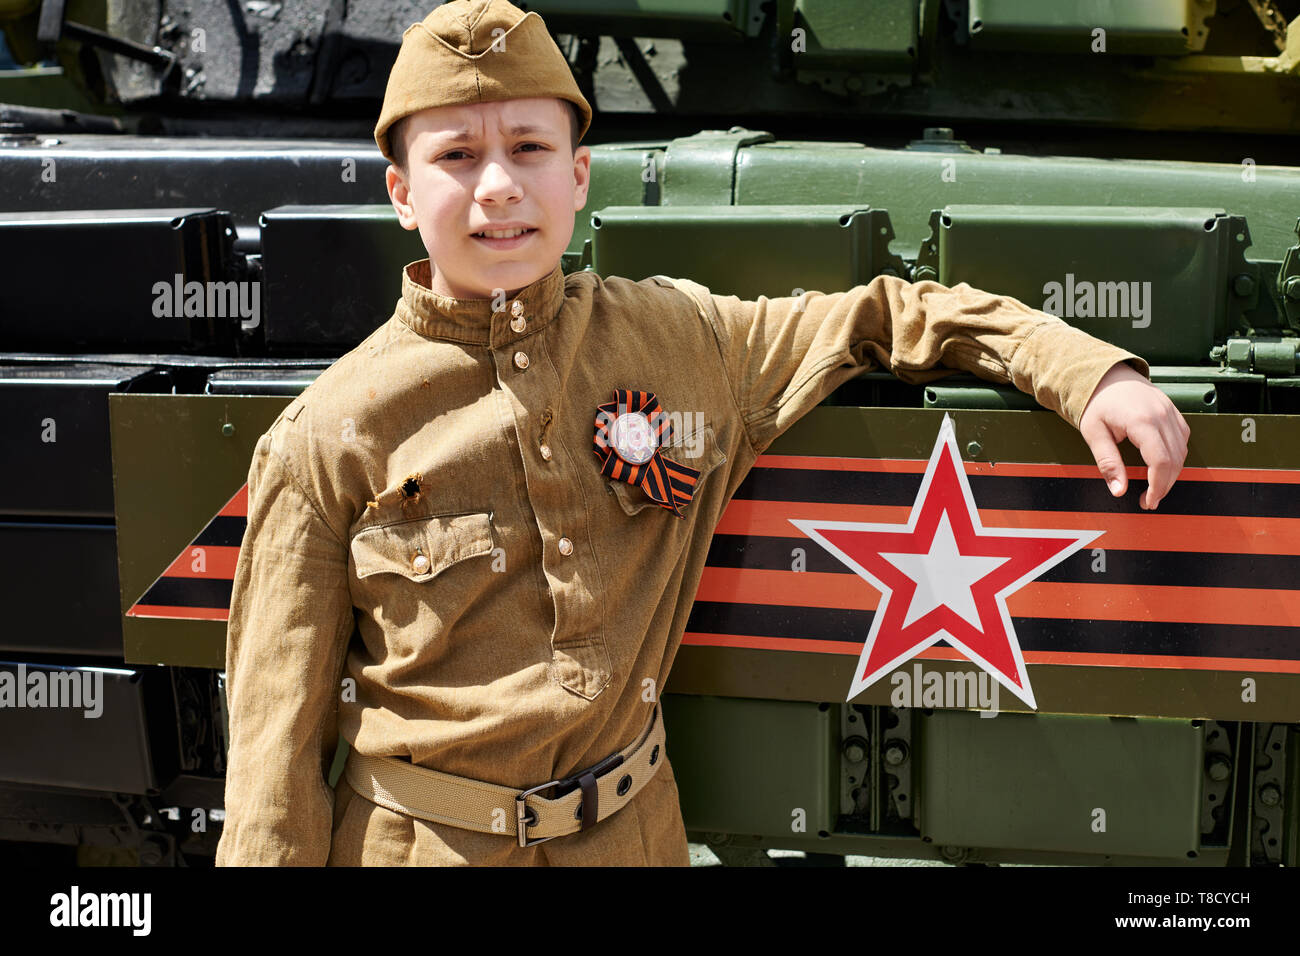 Boy dressed in Soviet military uniform during the second world war posing near army tank Stock Photo